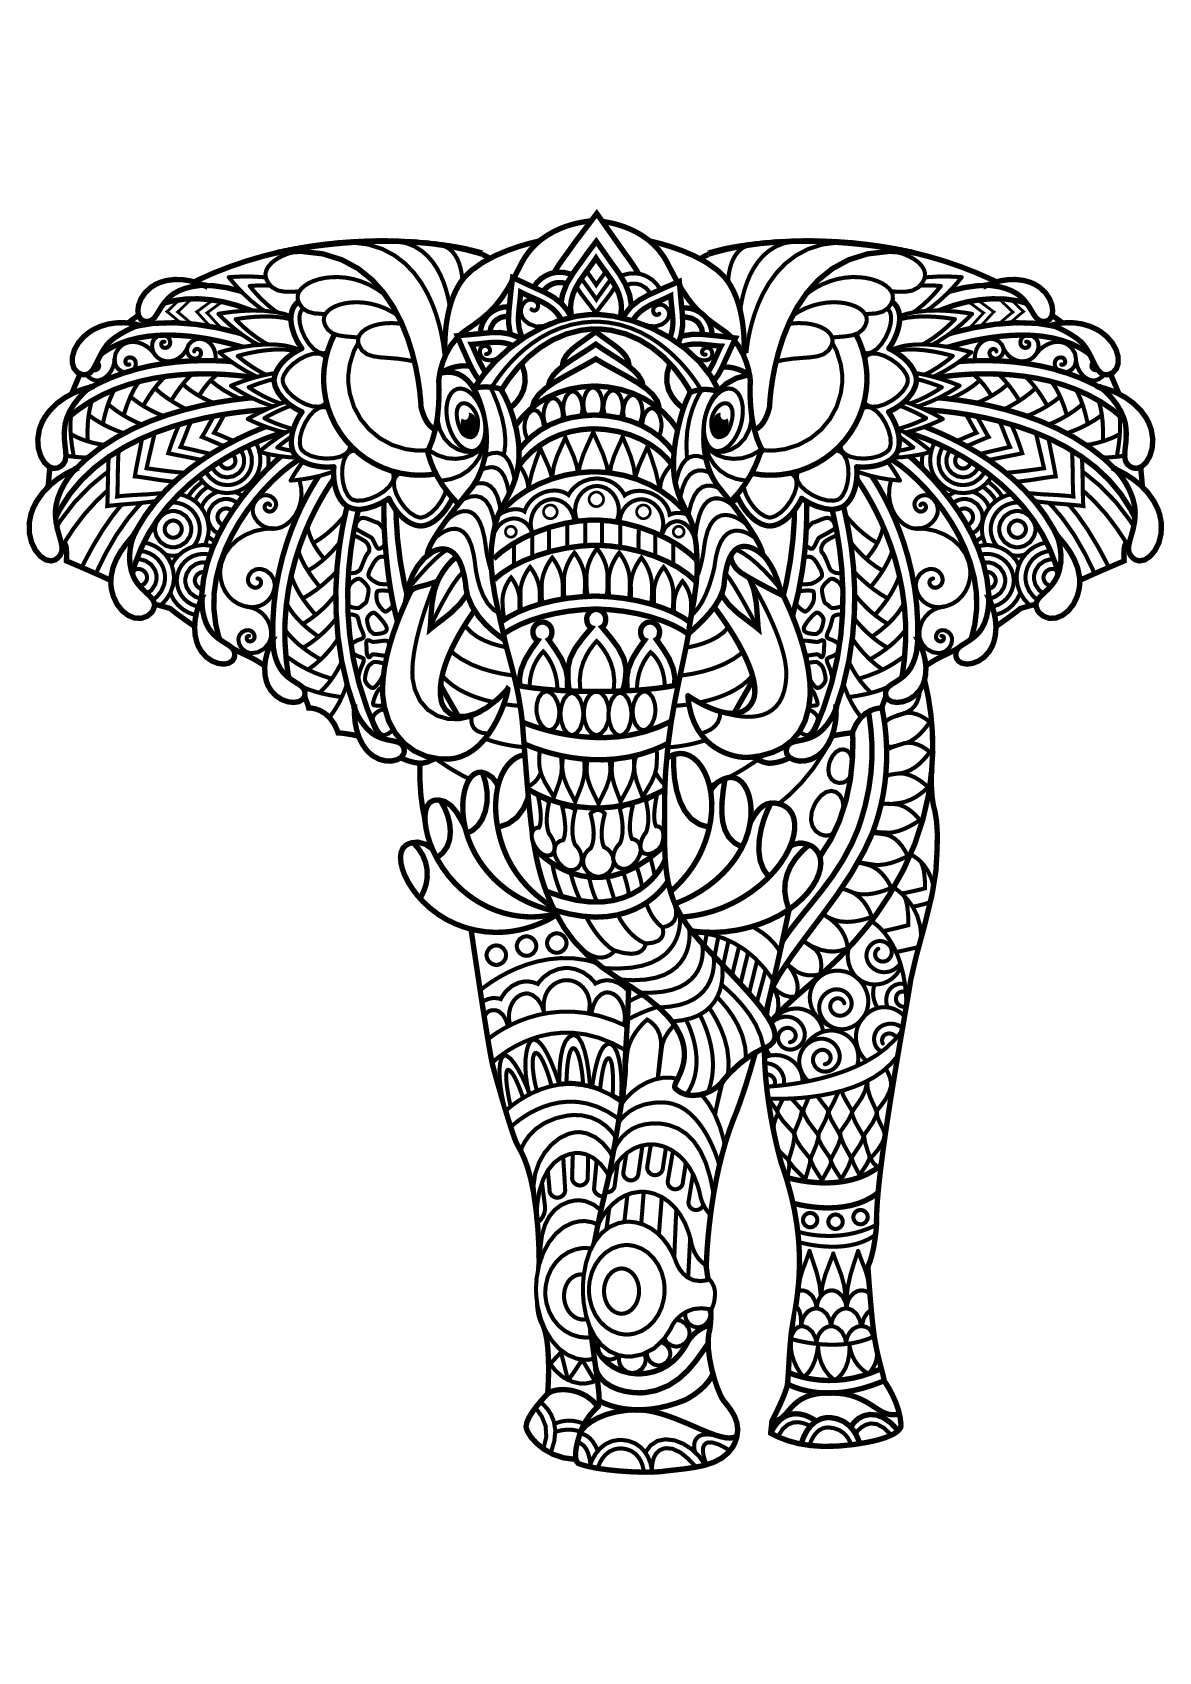 Majestic elephant, with harmonious and complex patterns